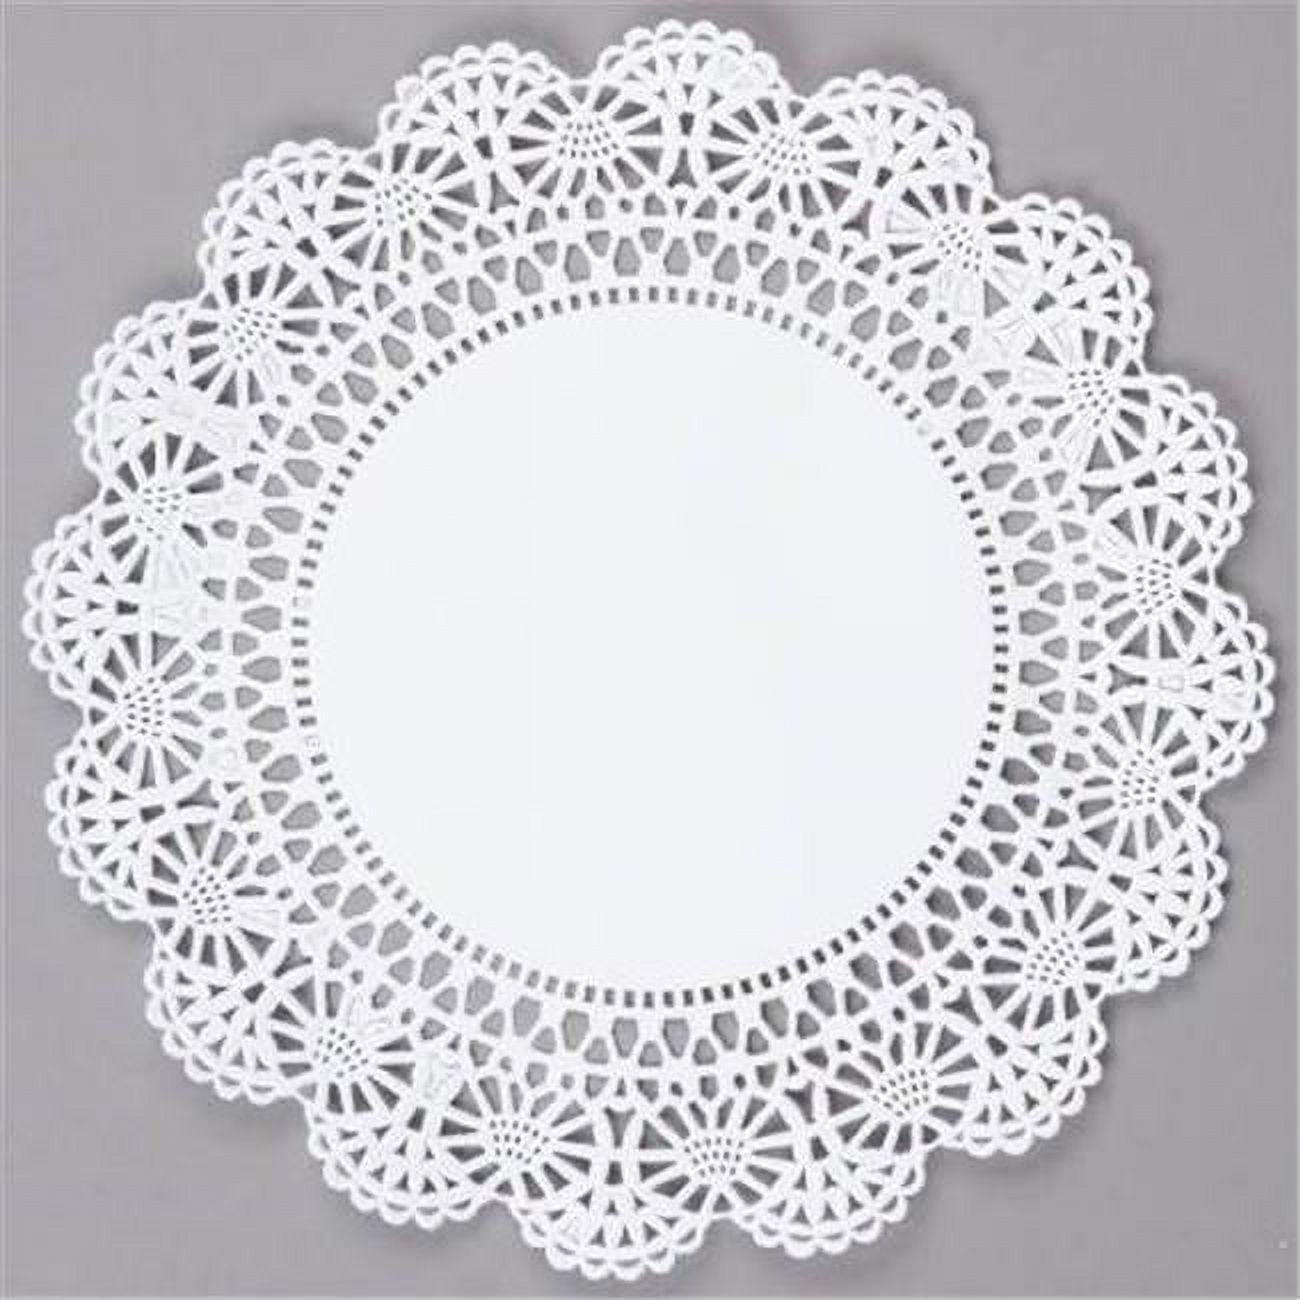 8 In. White Doilie Lace Cambridge - Case Of 1000